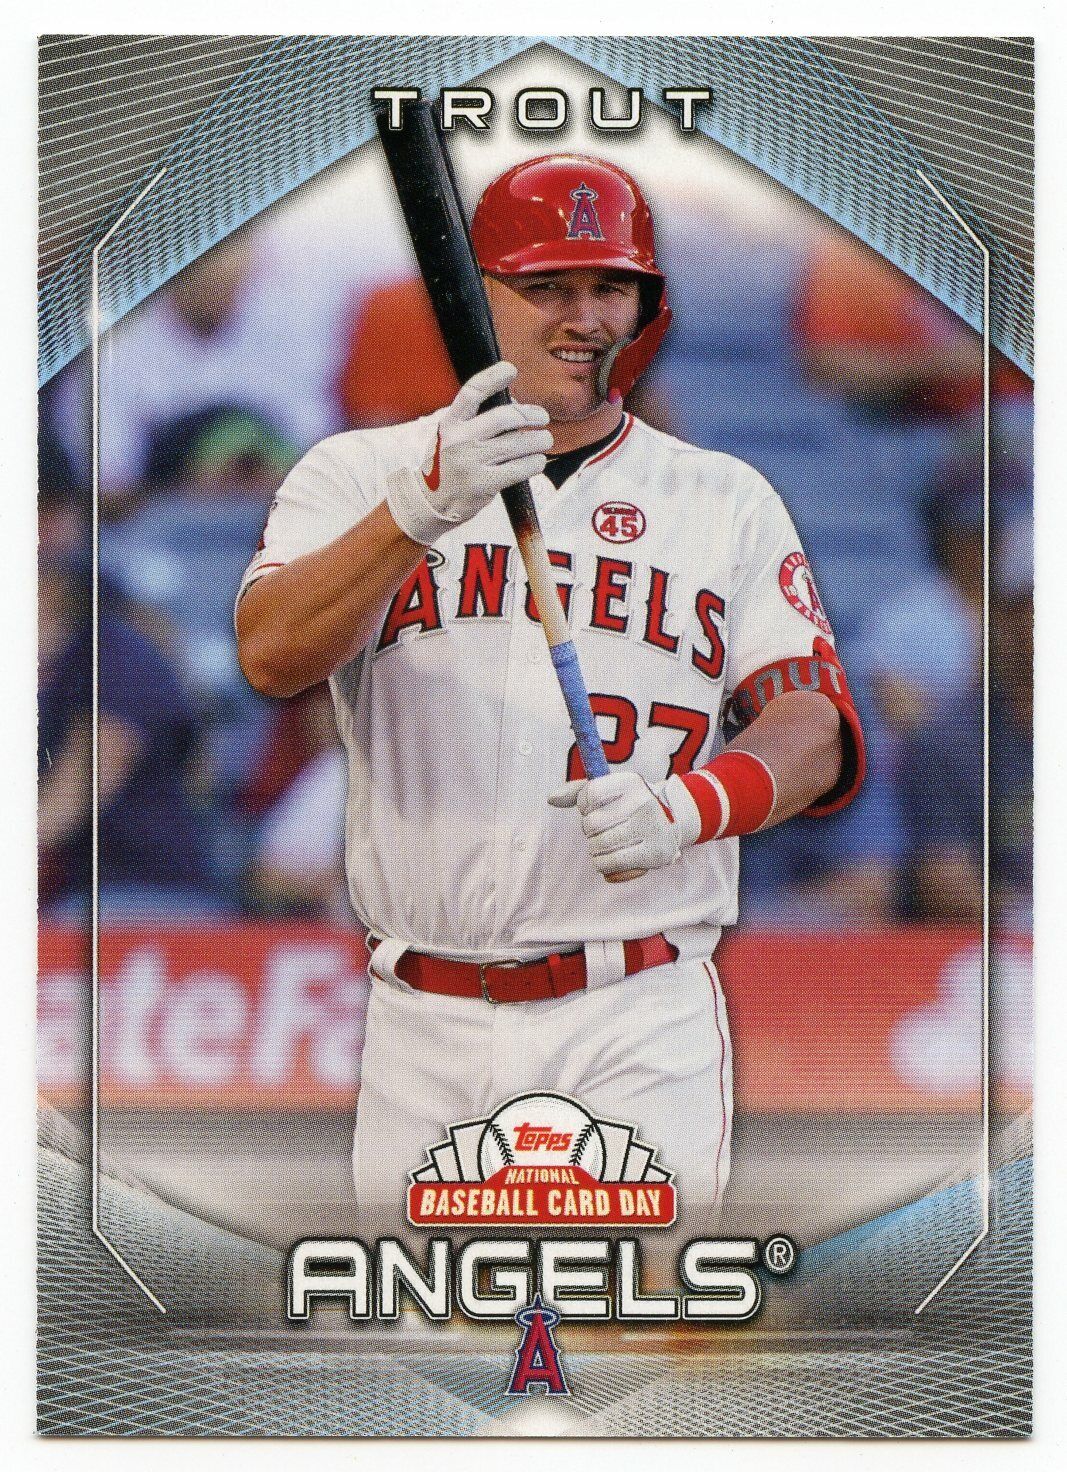 2020 NATIONAL BASEBALL CARD DAY #NTCDG-2 MIKE TROUT  ANGELS